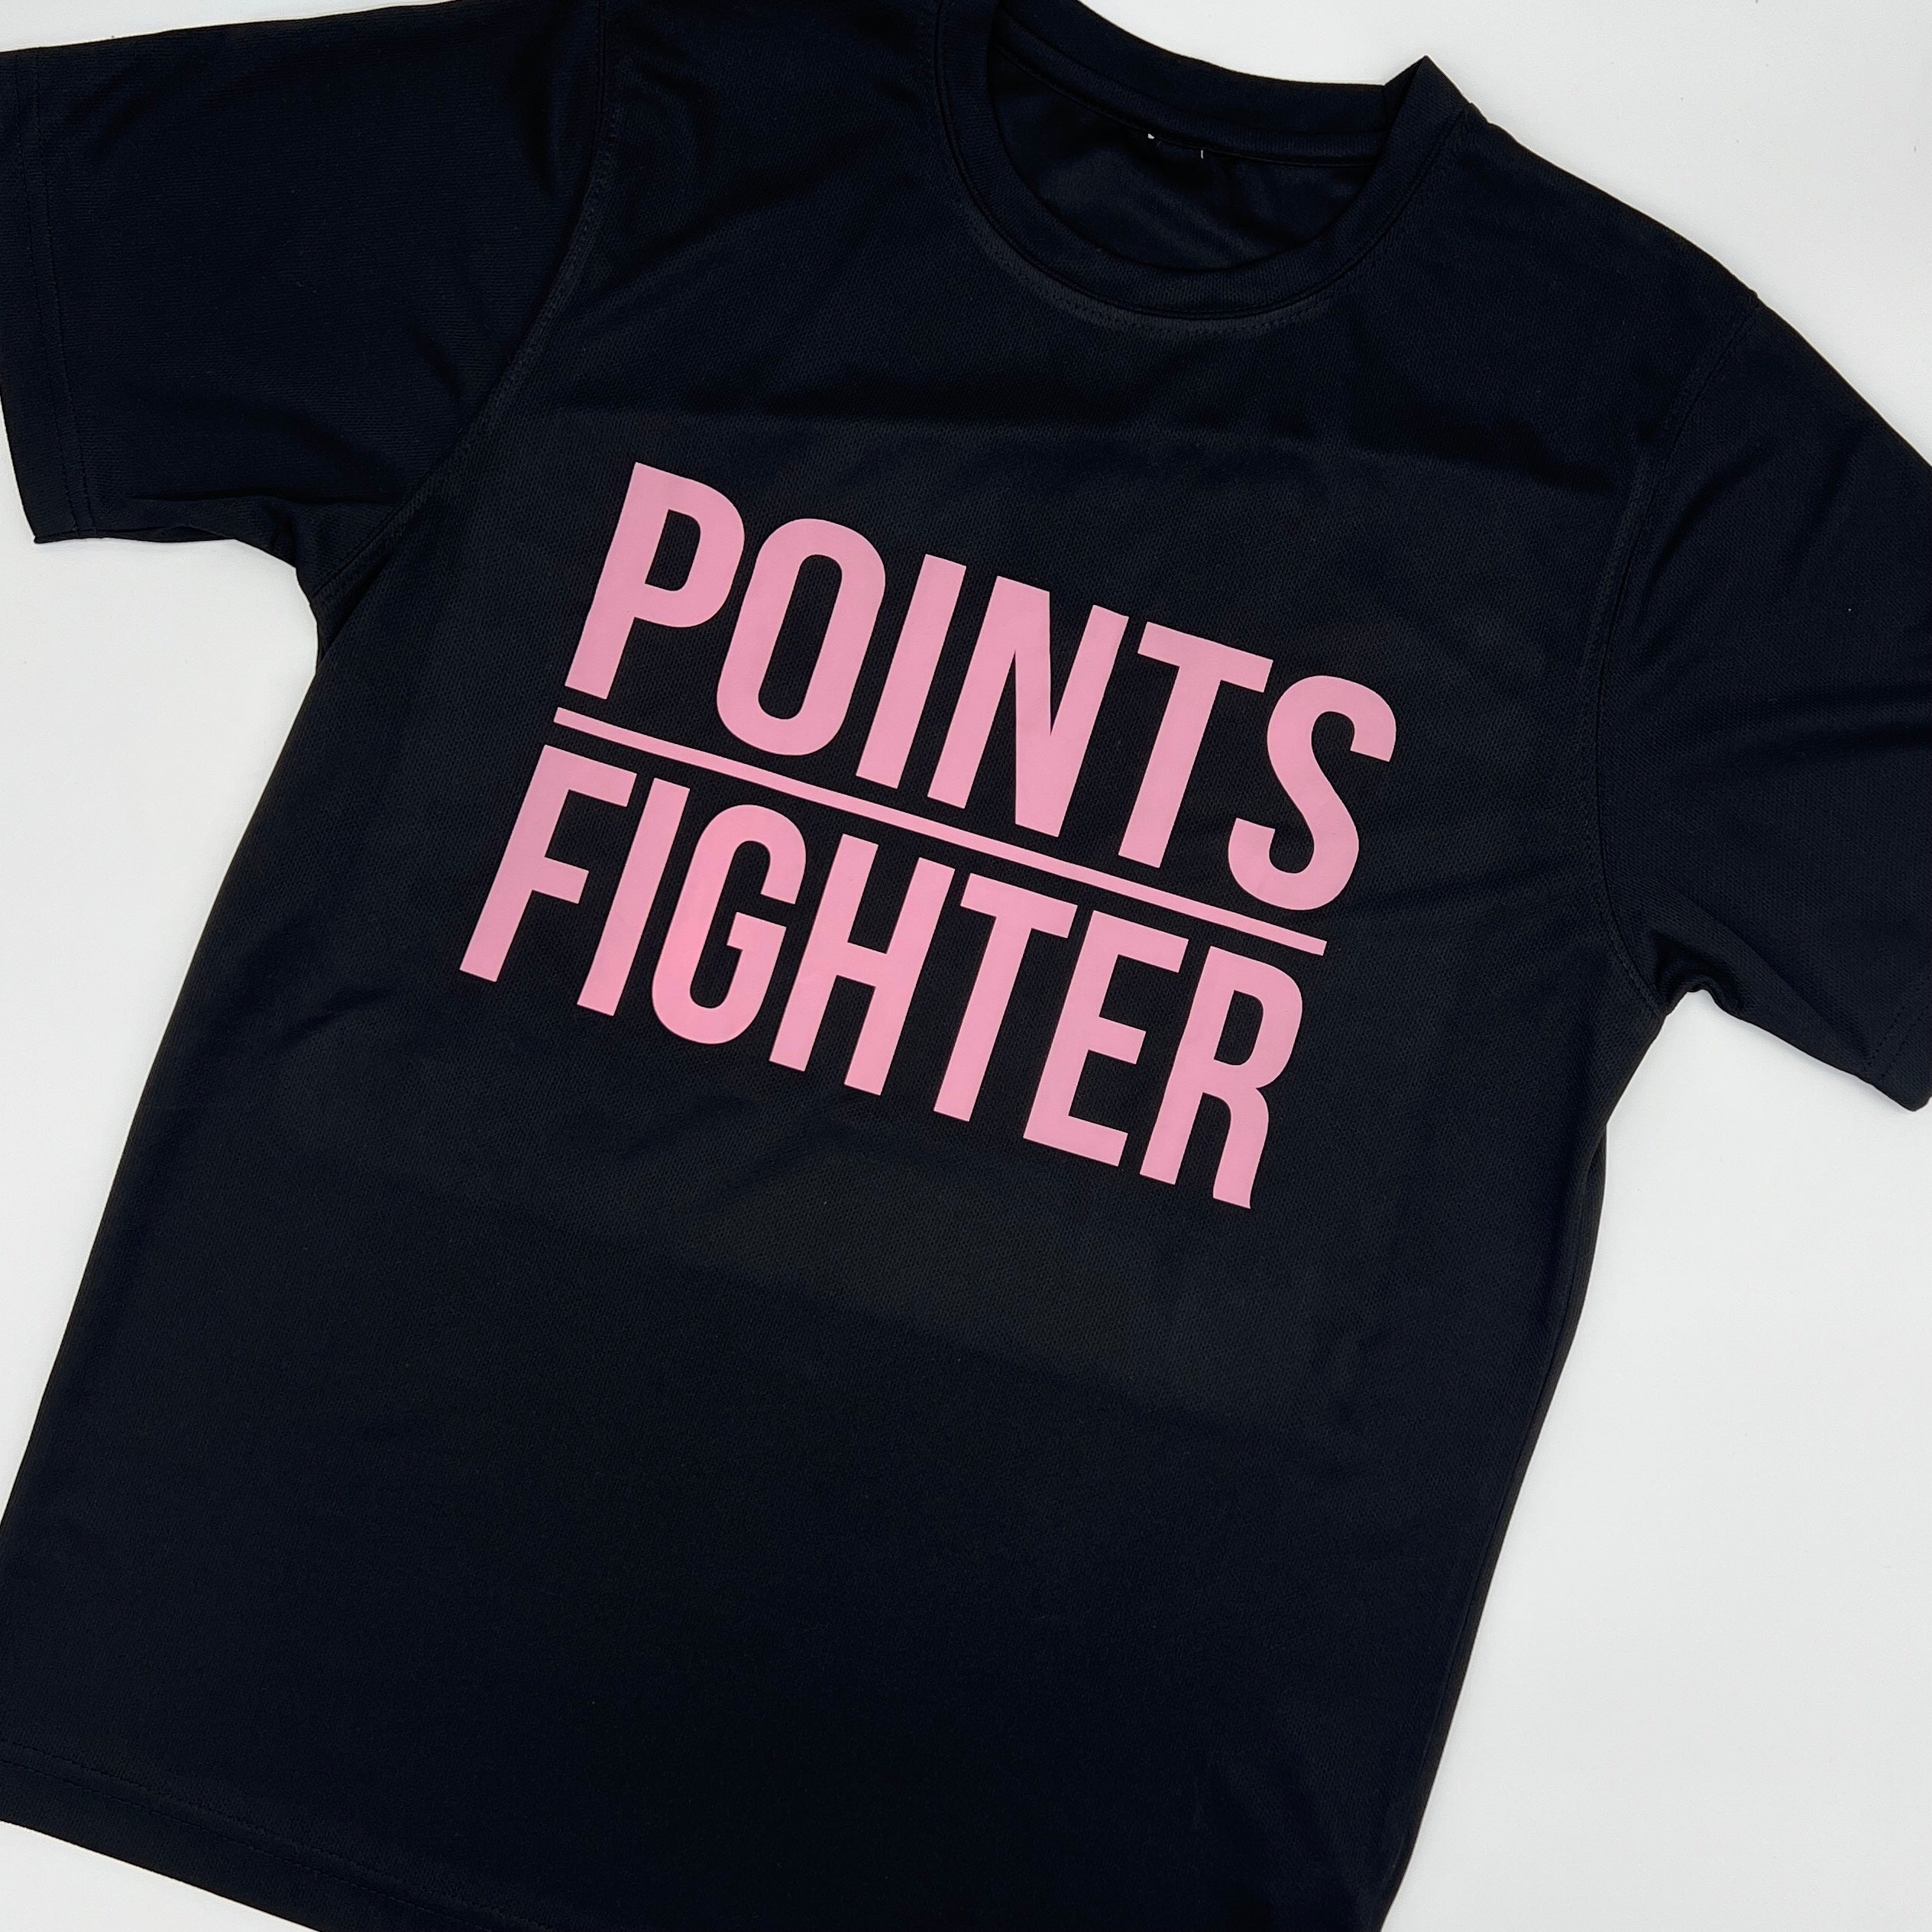 Points Fighter Tech T-Shirt - Baby Pink